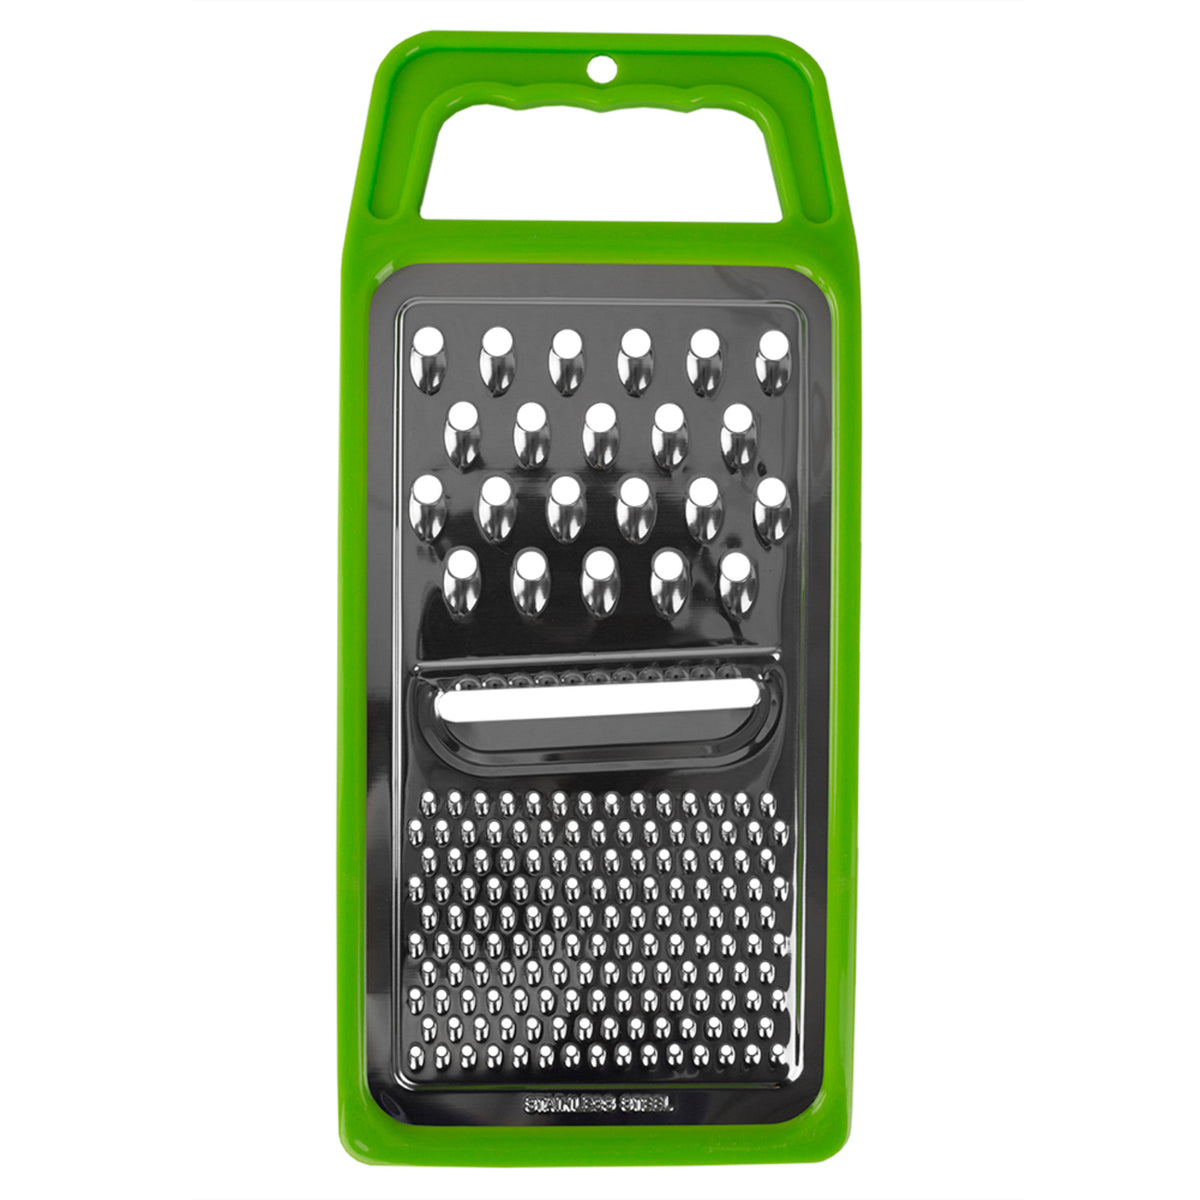 Kanda 00089 Cheese Grater, Italian, 3.9 inches (10 cm), Commercial Use,  Home Use